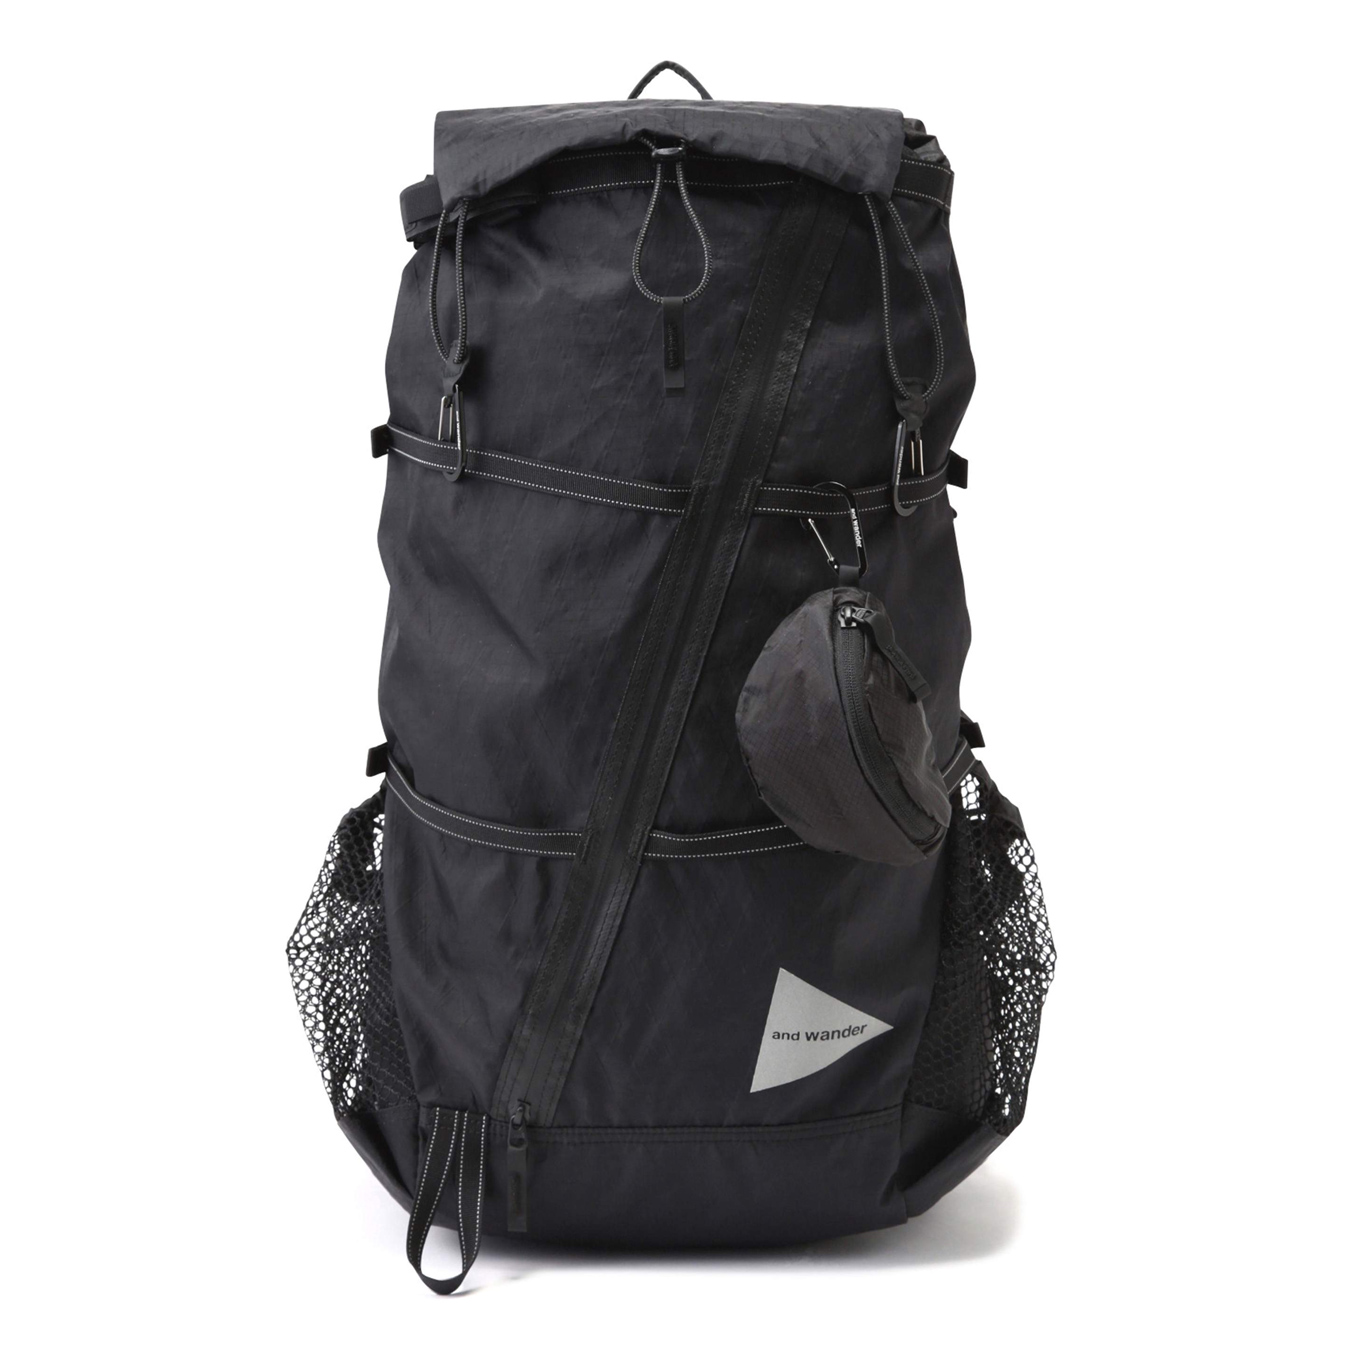 and wander / アンドワンダー | X-Pac 40L backpack - Black | 通販